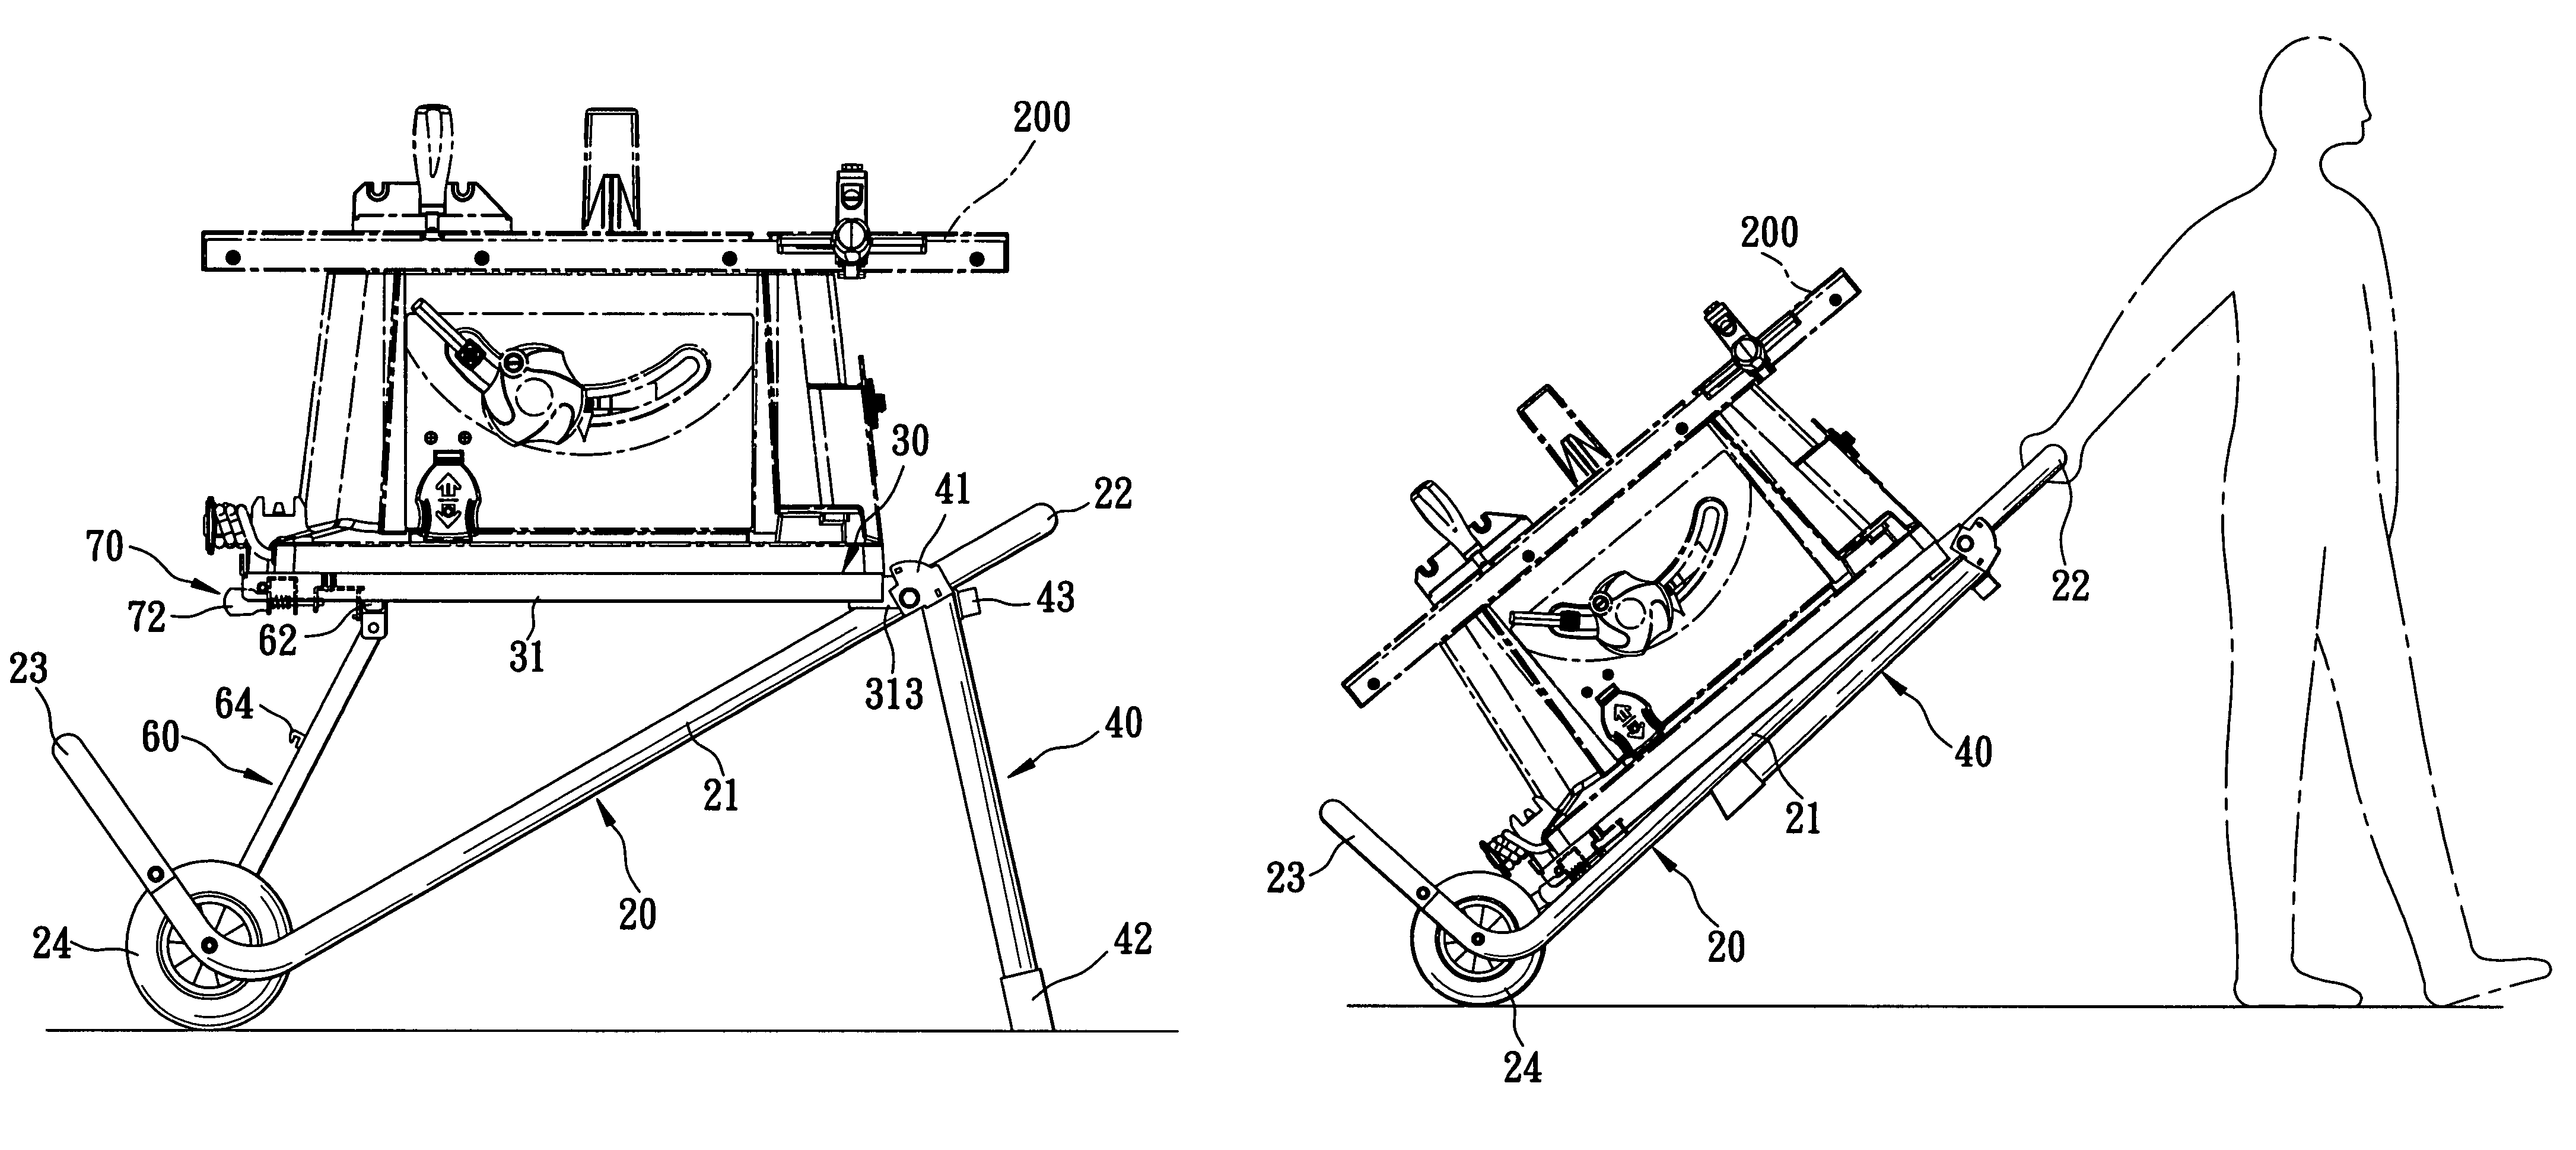 Foldable frame assembly for suspending a machine above a ground surface